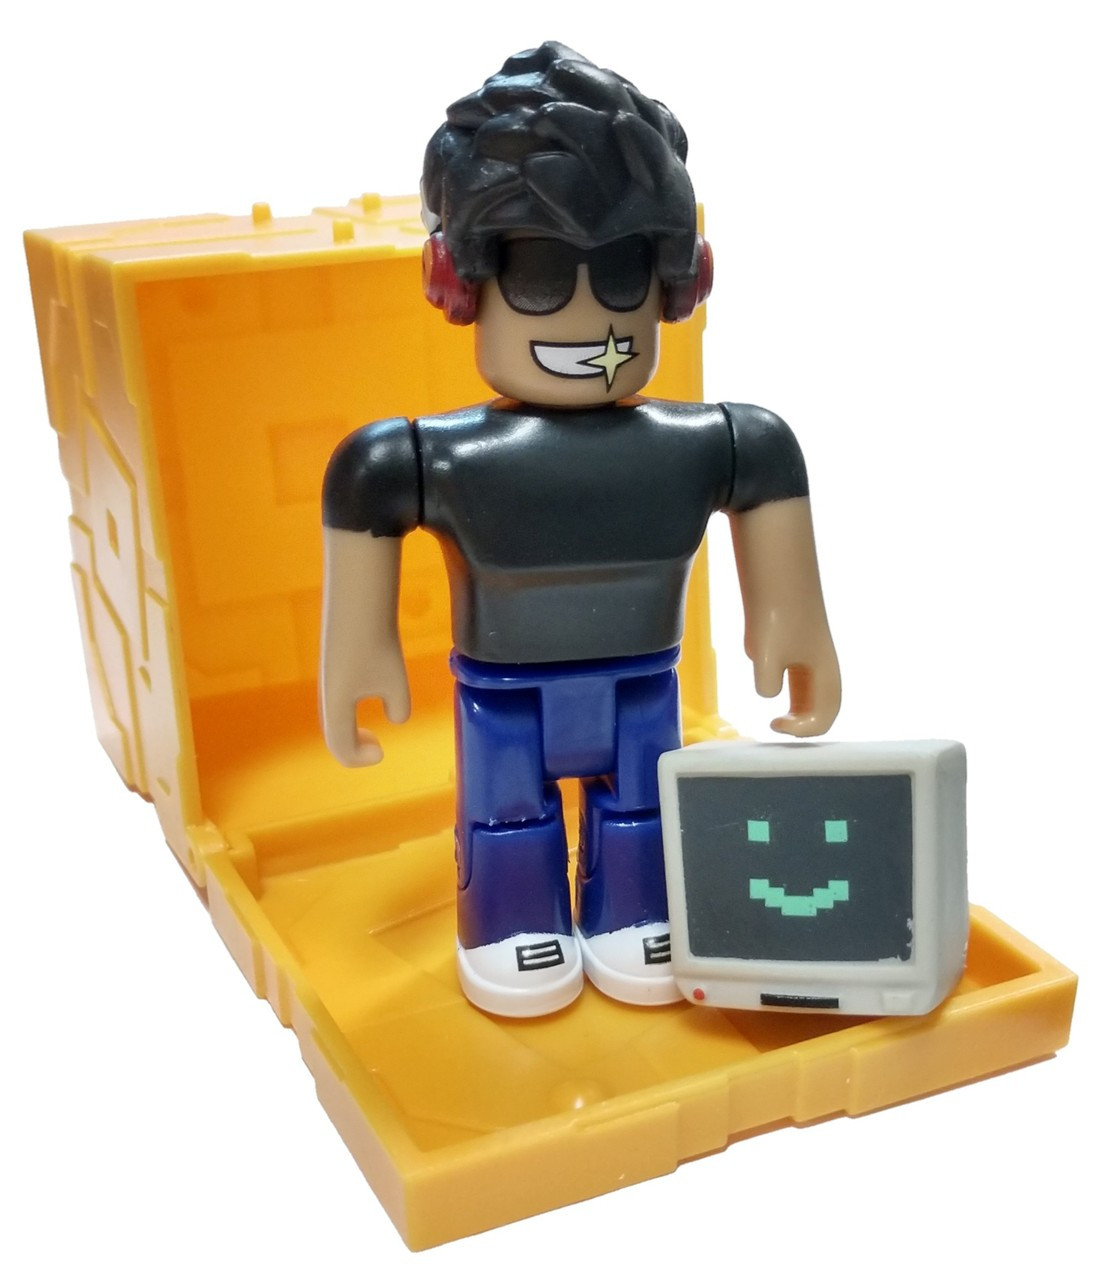 Roblox Series 5 Simbuilder 3 Mini Figure With Gold Cube And Online Code Loose Jazwares Toywiz - series 6 roblox history museum sales staff mini figure with orange cube and online code loose